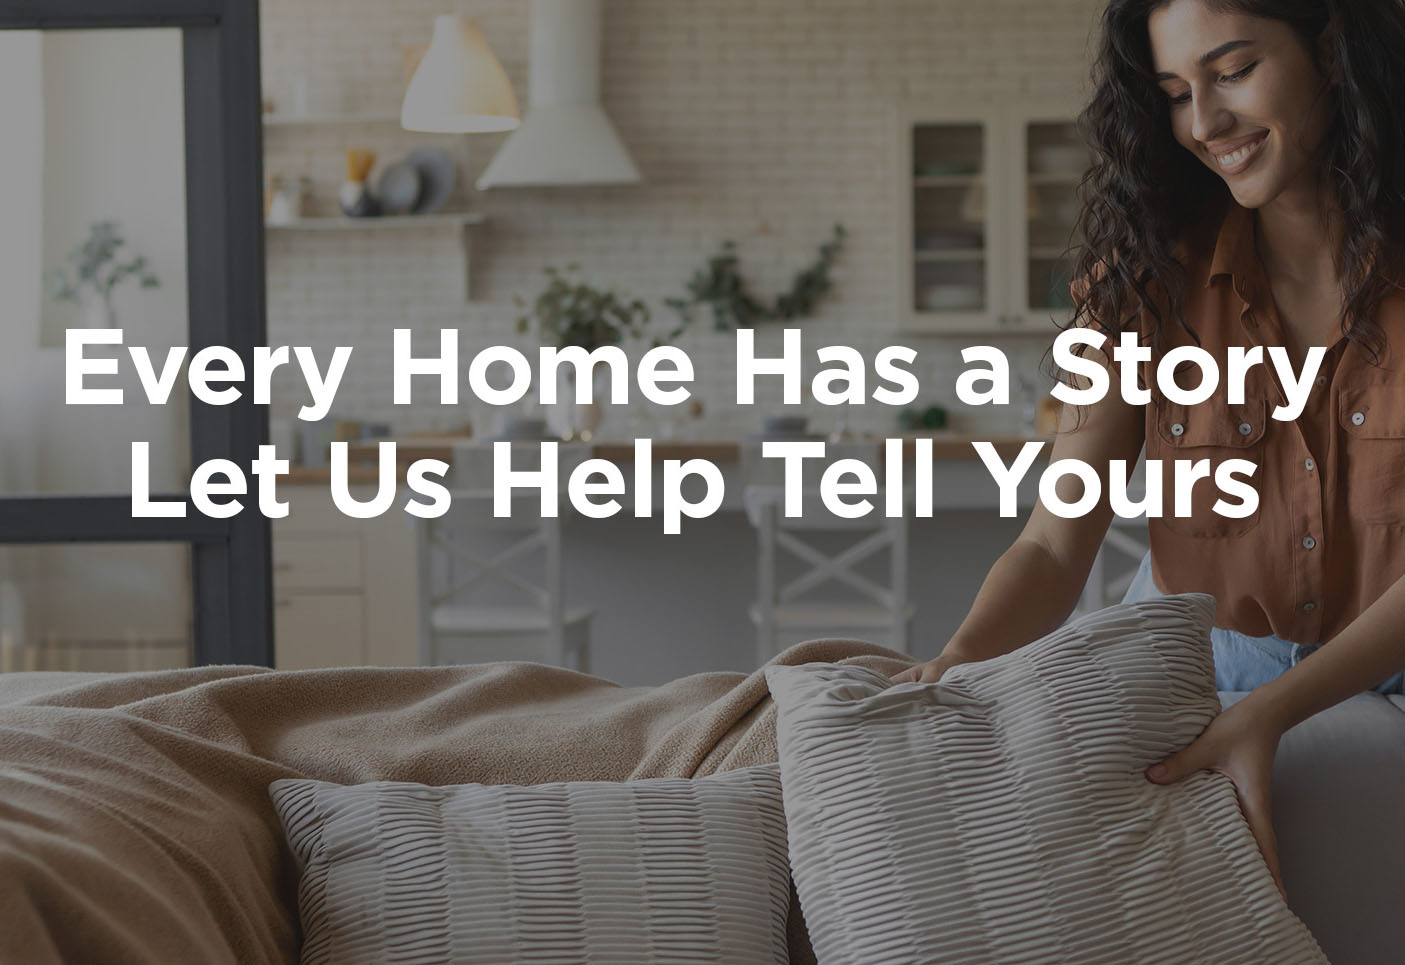 Why Shop Homethreads? About Us